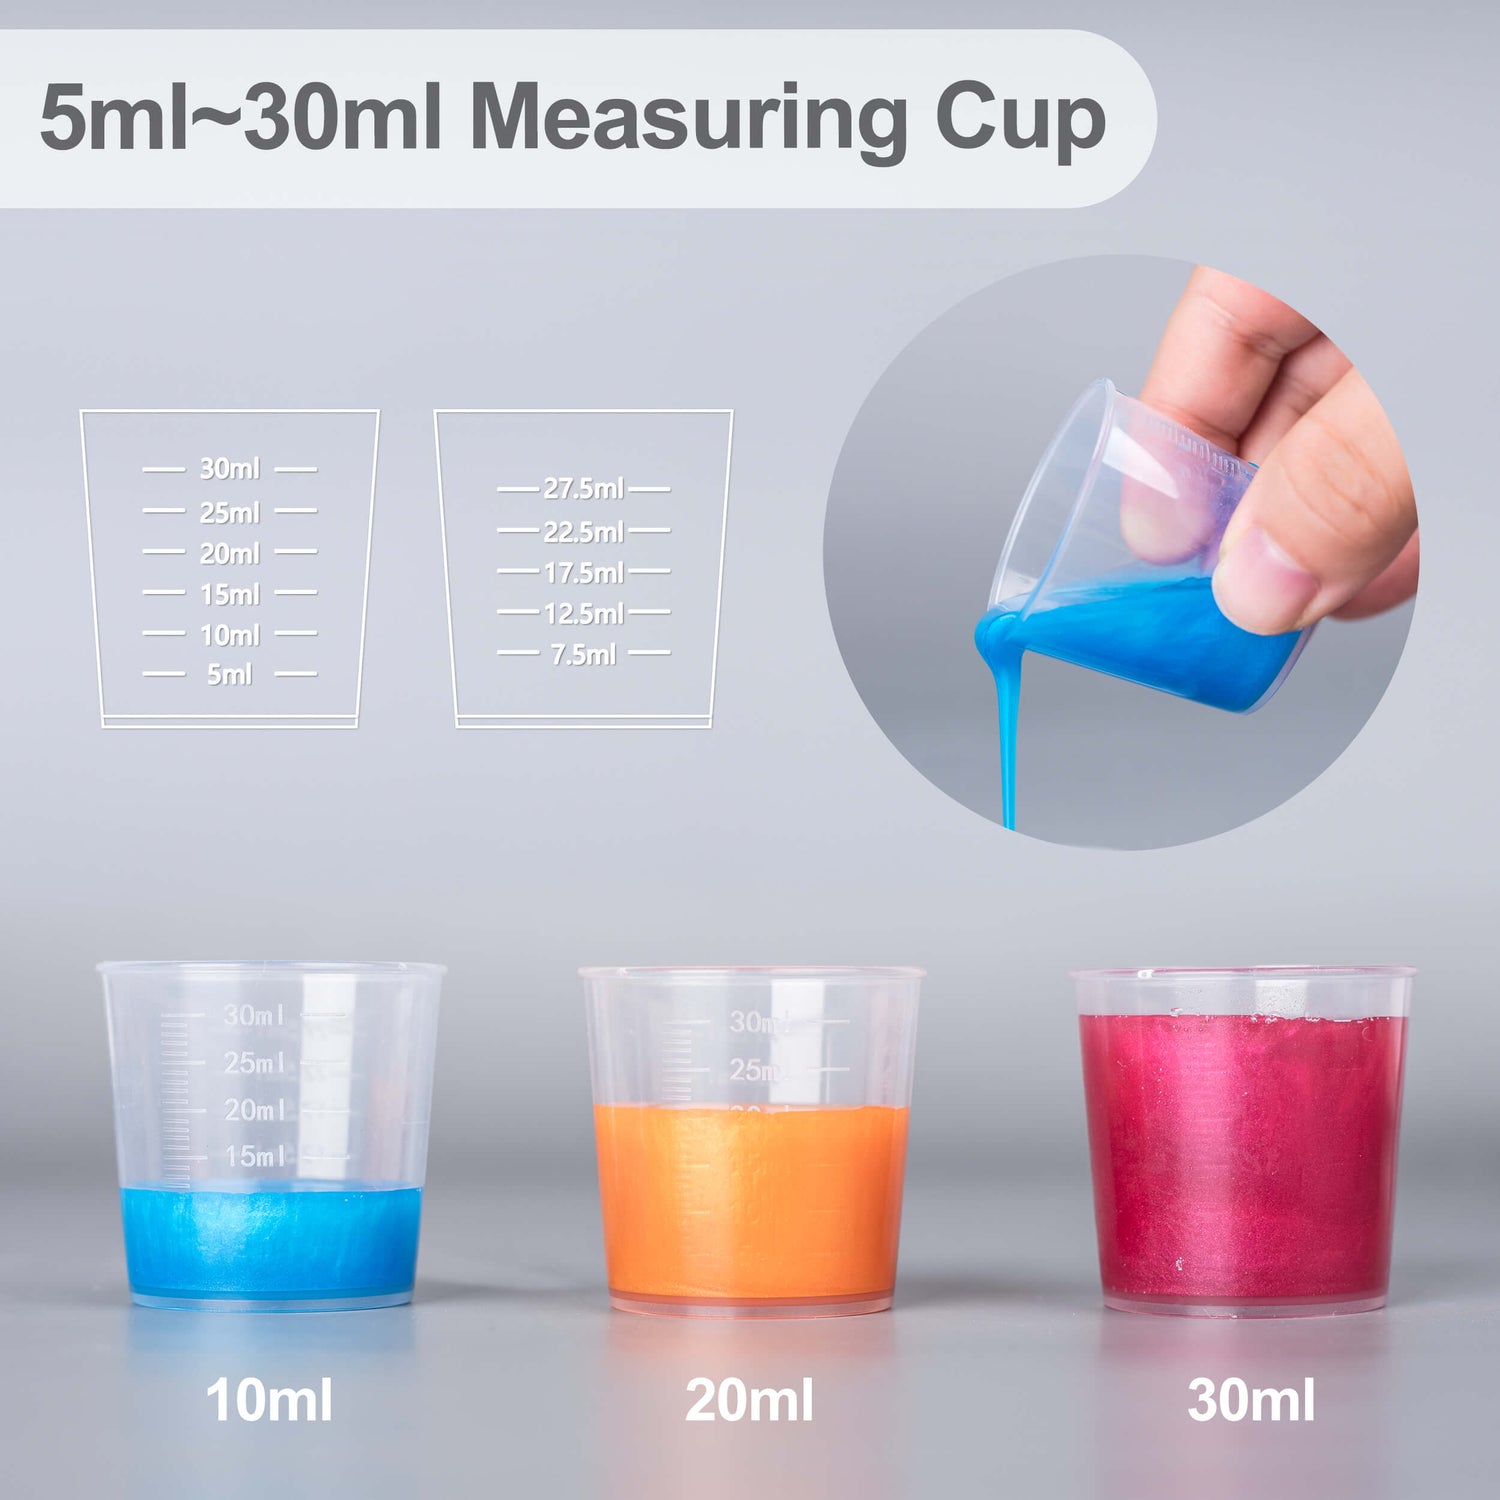 Small Measuring Cups 30ml, Resin Measuring Cups, 30ml Mixing Cup, Disposable Dosage Cups, Small Plastic Containers, Medicine Cup